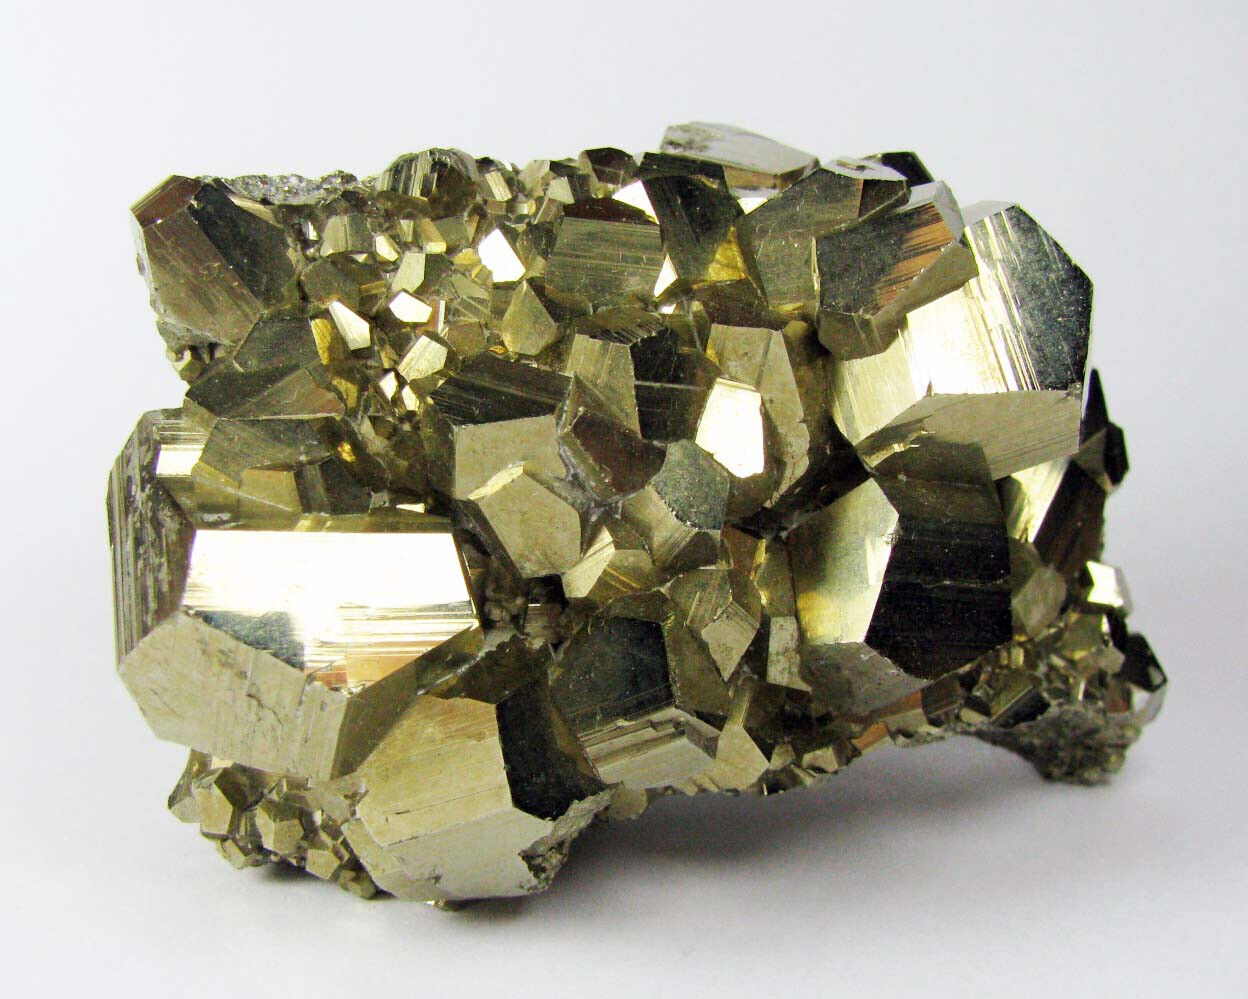 PYRITE BRILLIANT PENTADODECAHEDRAL CRYSTALS from PERU...WONDERFUL SHINING PYRITE